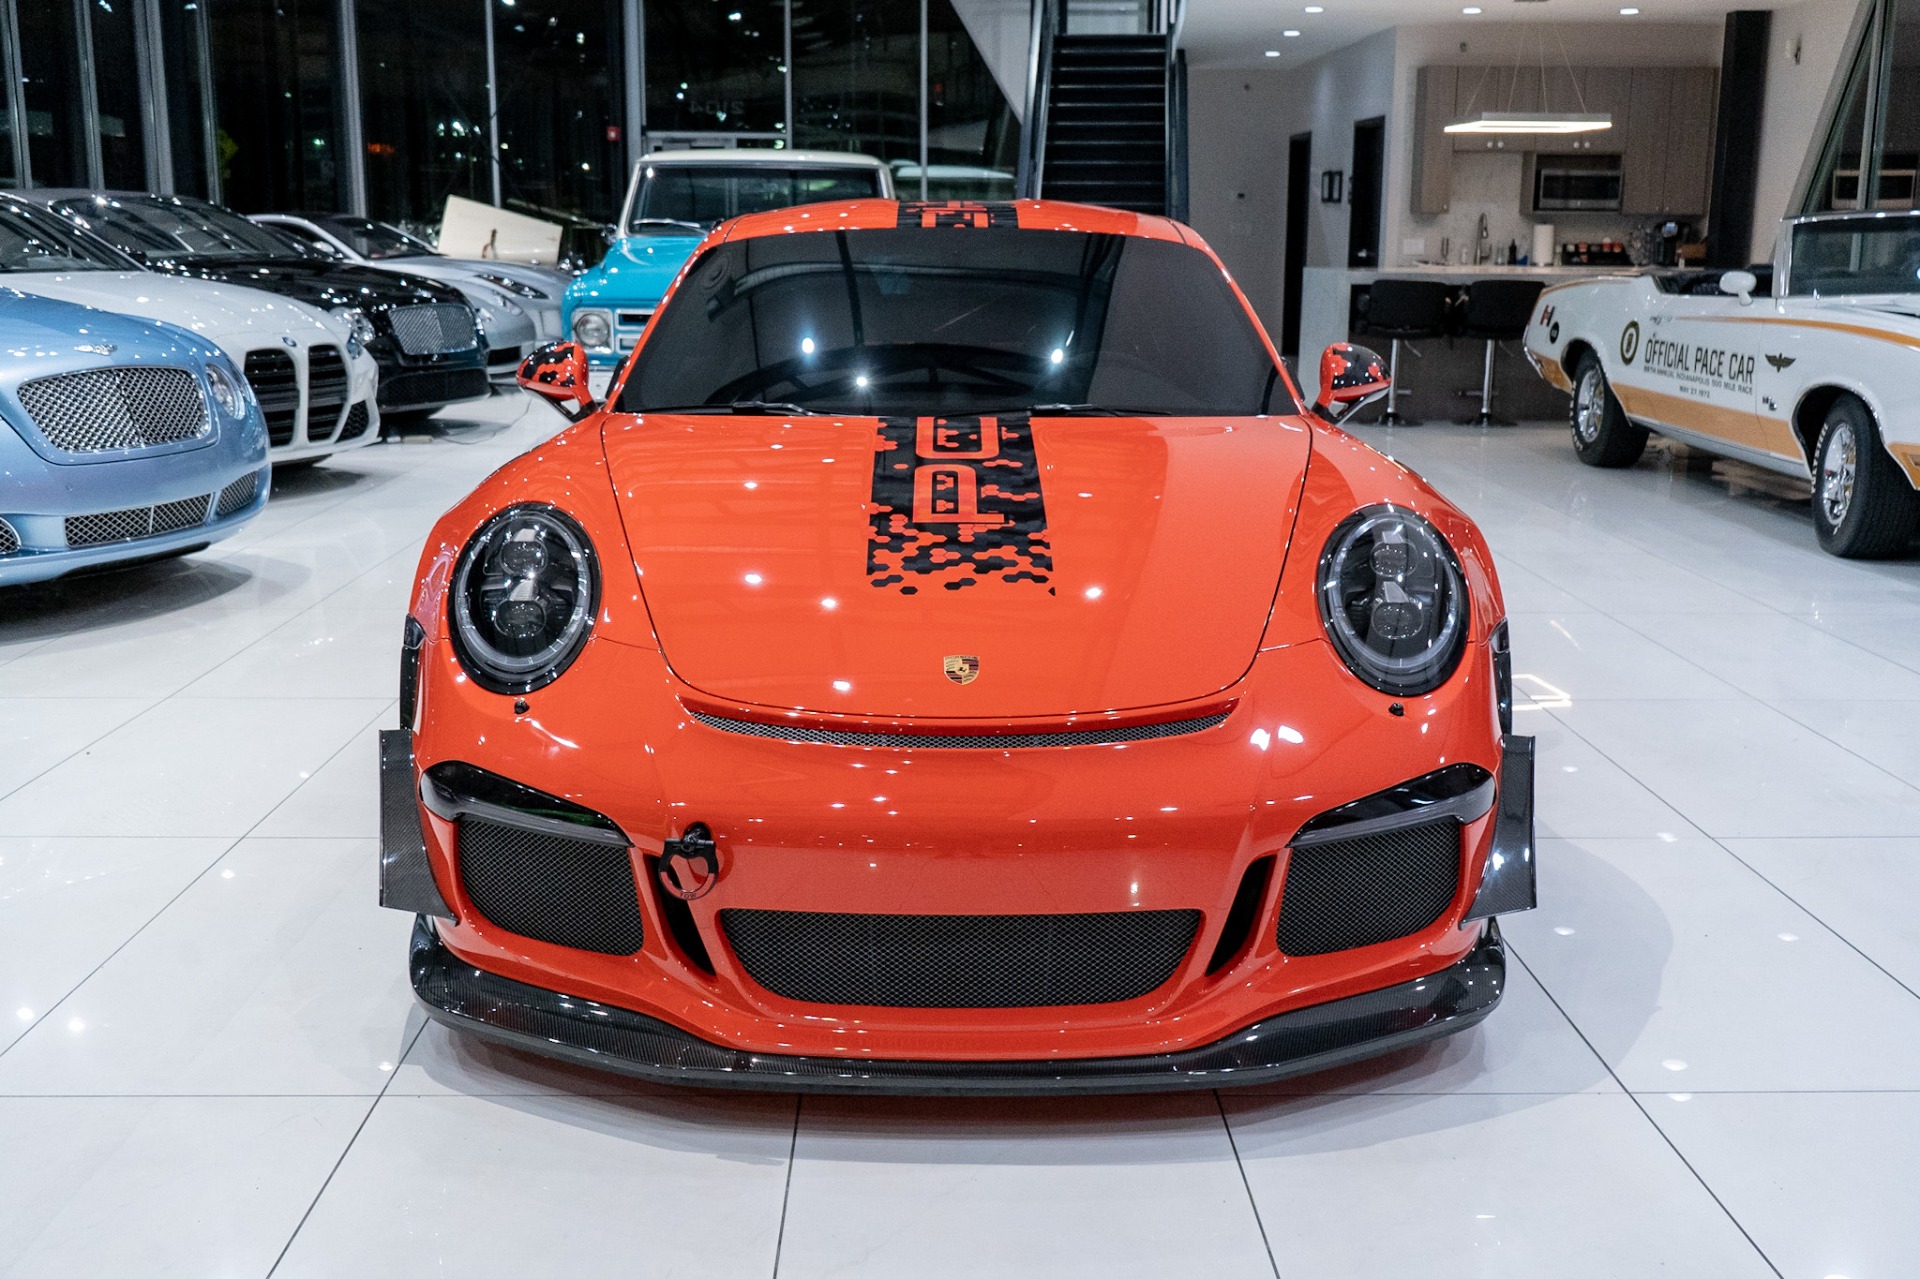 Used-2016-Porsche-911-GT3-RS-Coupe-ONLY-729-Miles-Thousands-in-UPGRADES-TechART-Carbon-Fiber